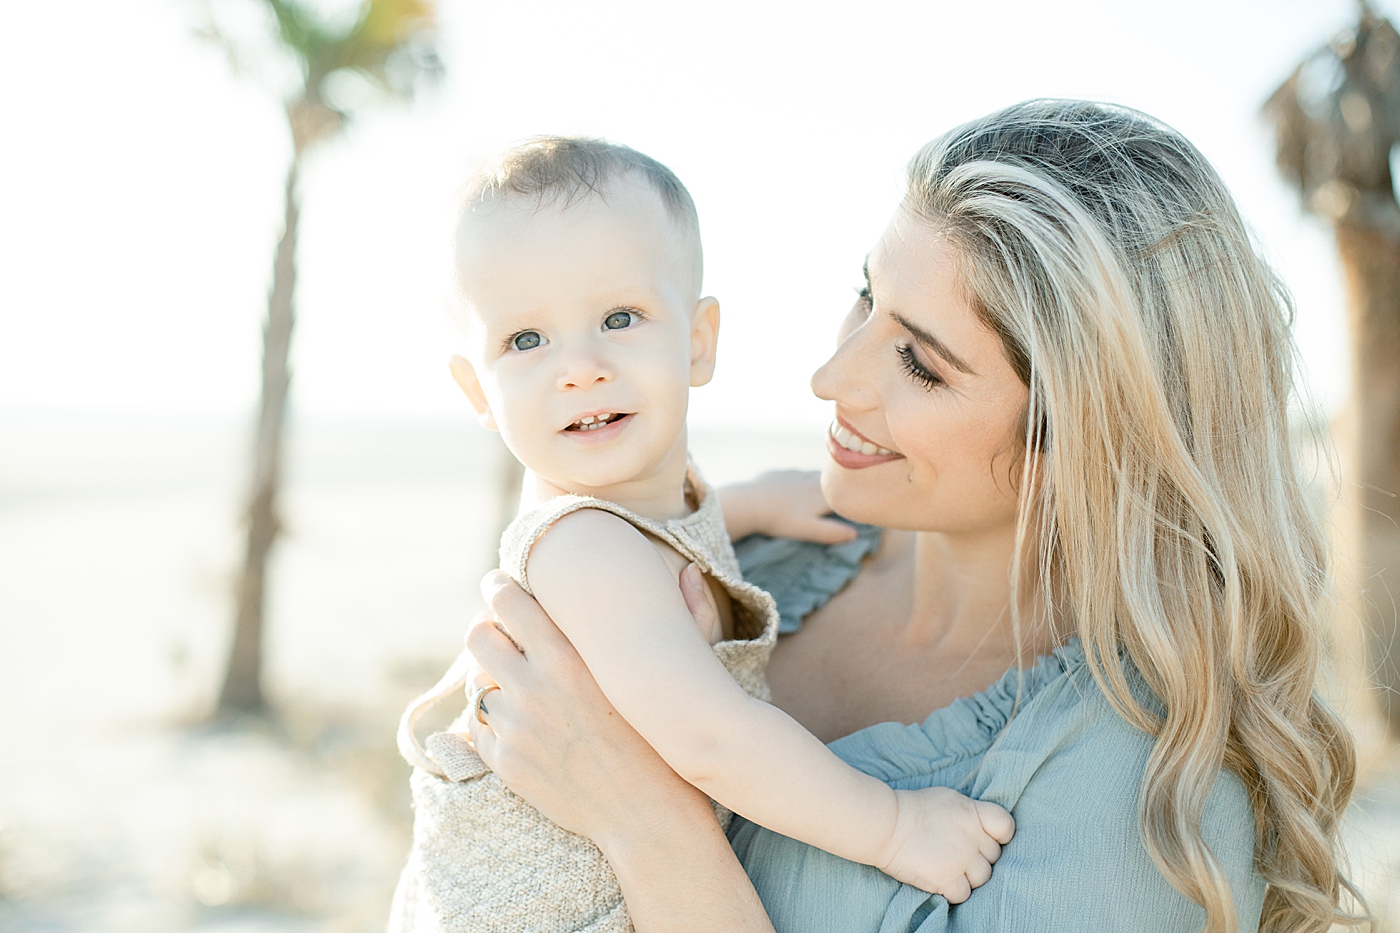 Mom smiling at her baby on the beach | Photo by Ocean Springs Family Photographer Little Sunshine Photography